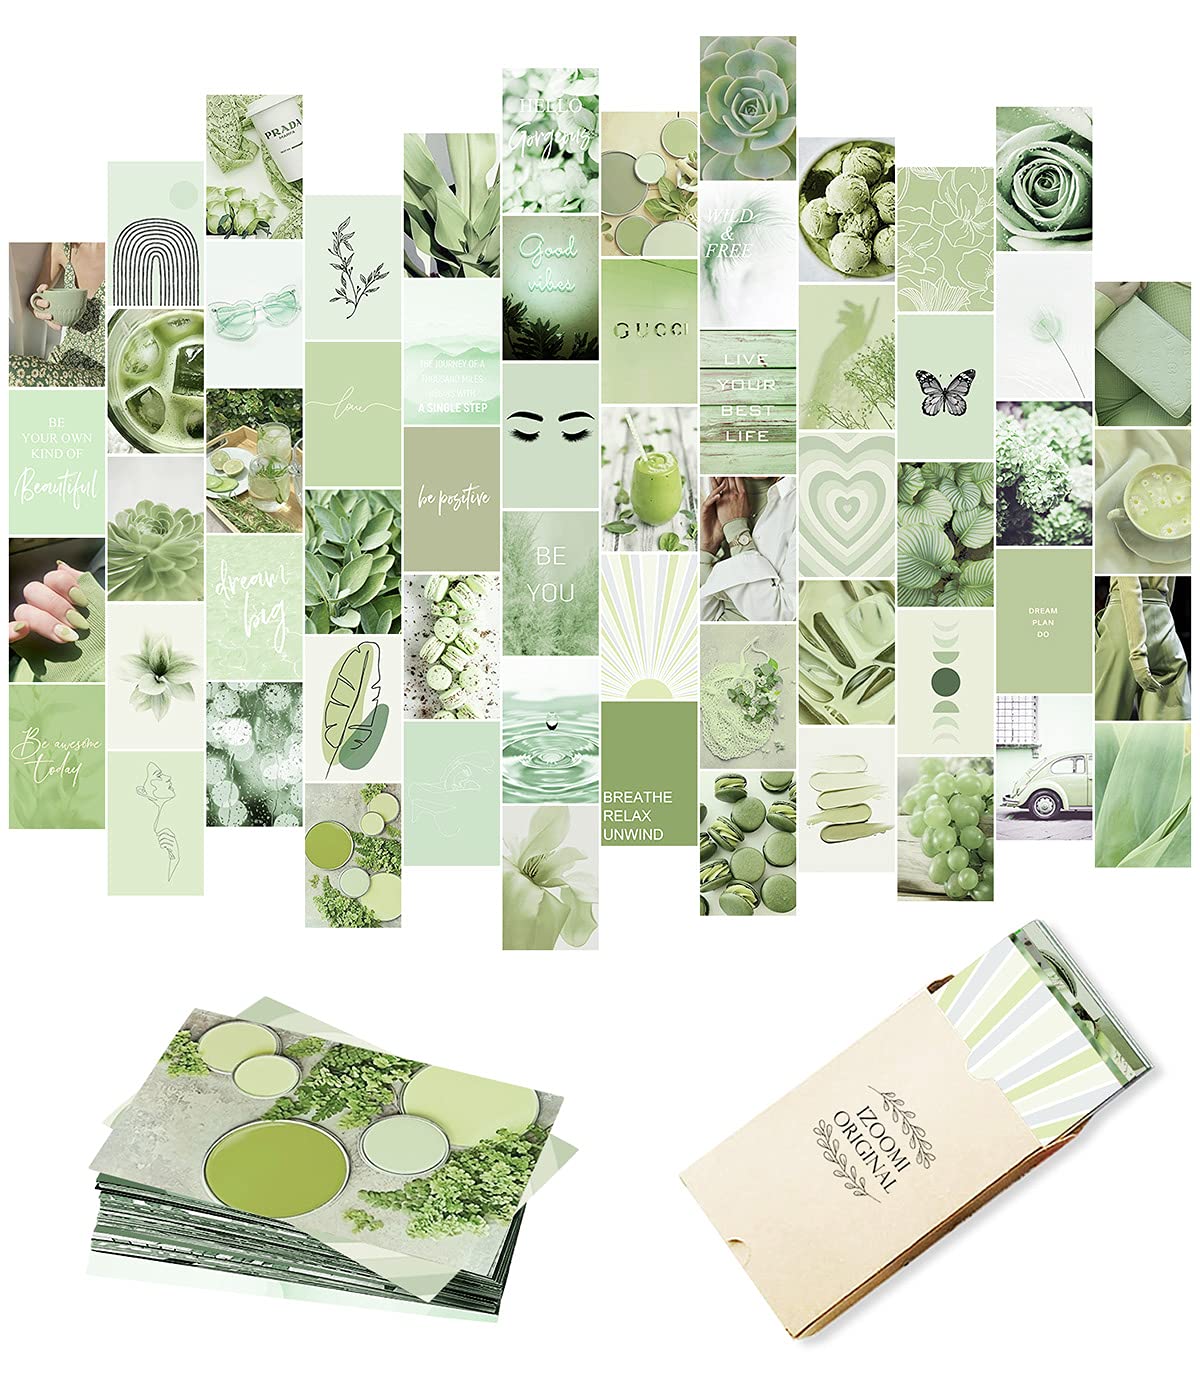 Sage Green Wall Collage Kit Aesthetic Picture, Aesthetic Room Decor, Bedroom Decor for Teen Girls, Wall Collage Kit, Photo Wall, Aesthetic Posters, Collage Kit, Green Wall Decor (60 PCS, 4x6 inch)